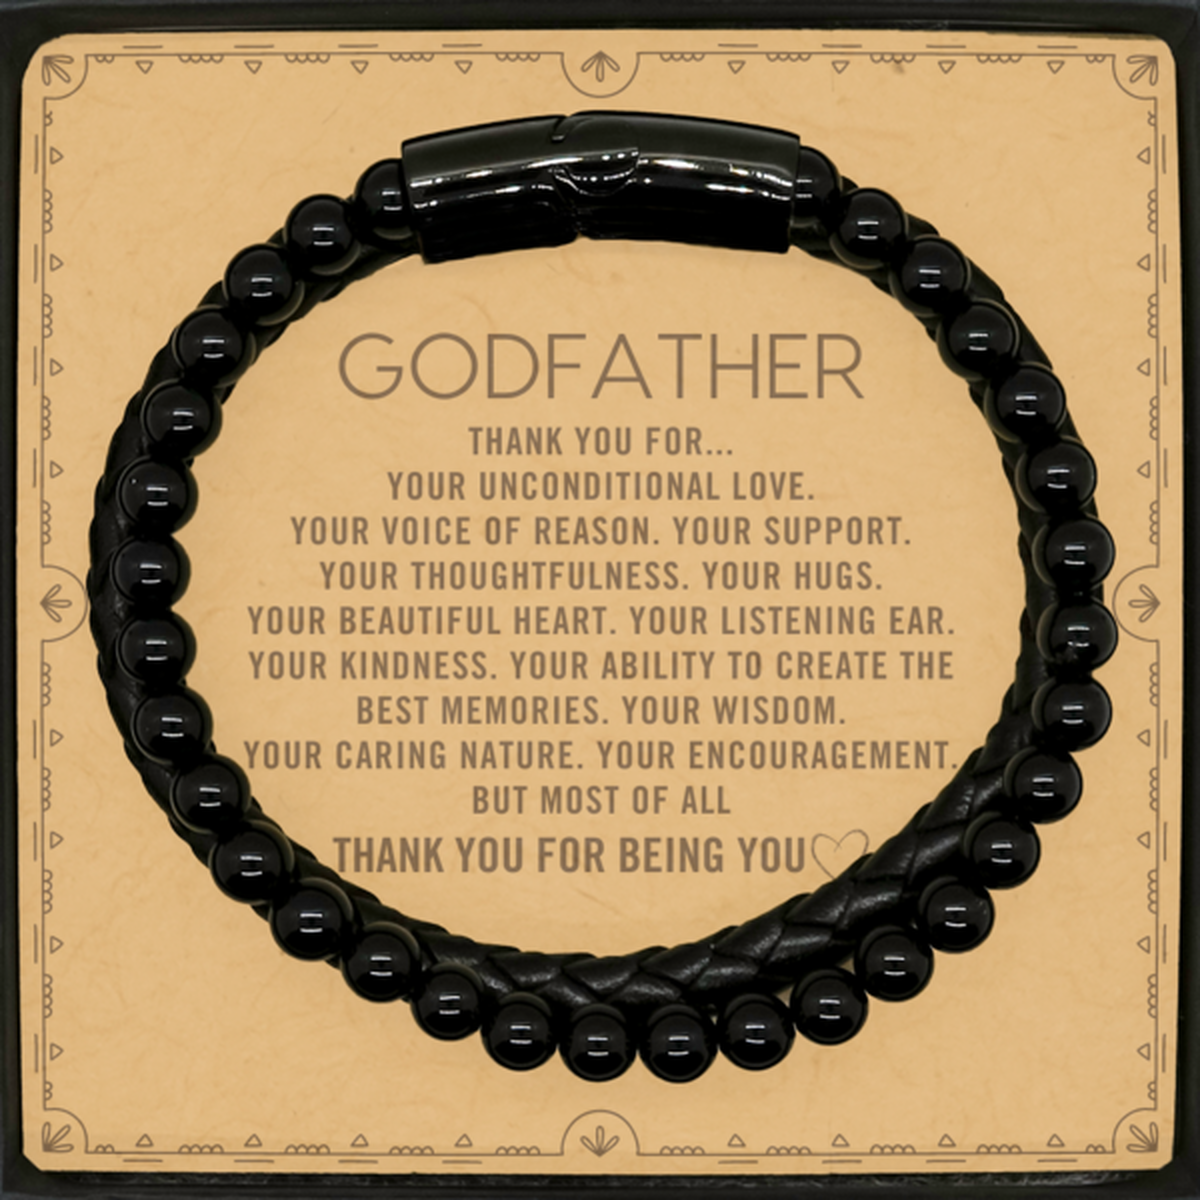 Godfather Stone Leather Bracelets Custom, Message Card Gifts For Godfather Christmas Graduation Birthday Gifts for Men Women Godfather Thank you for Your unconditional love